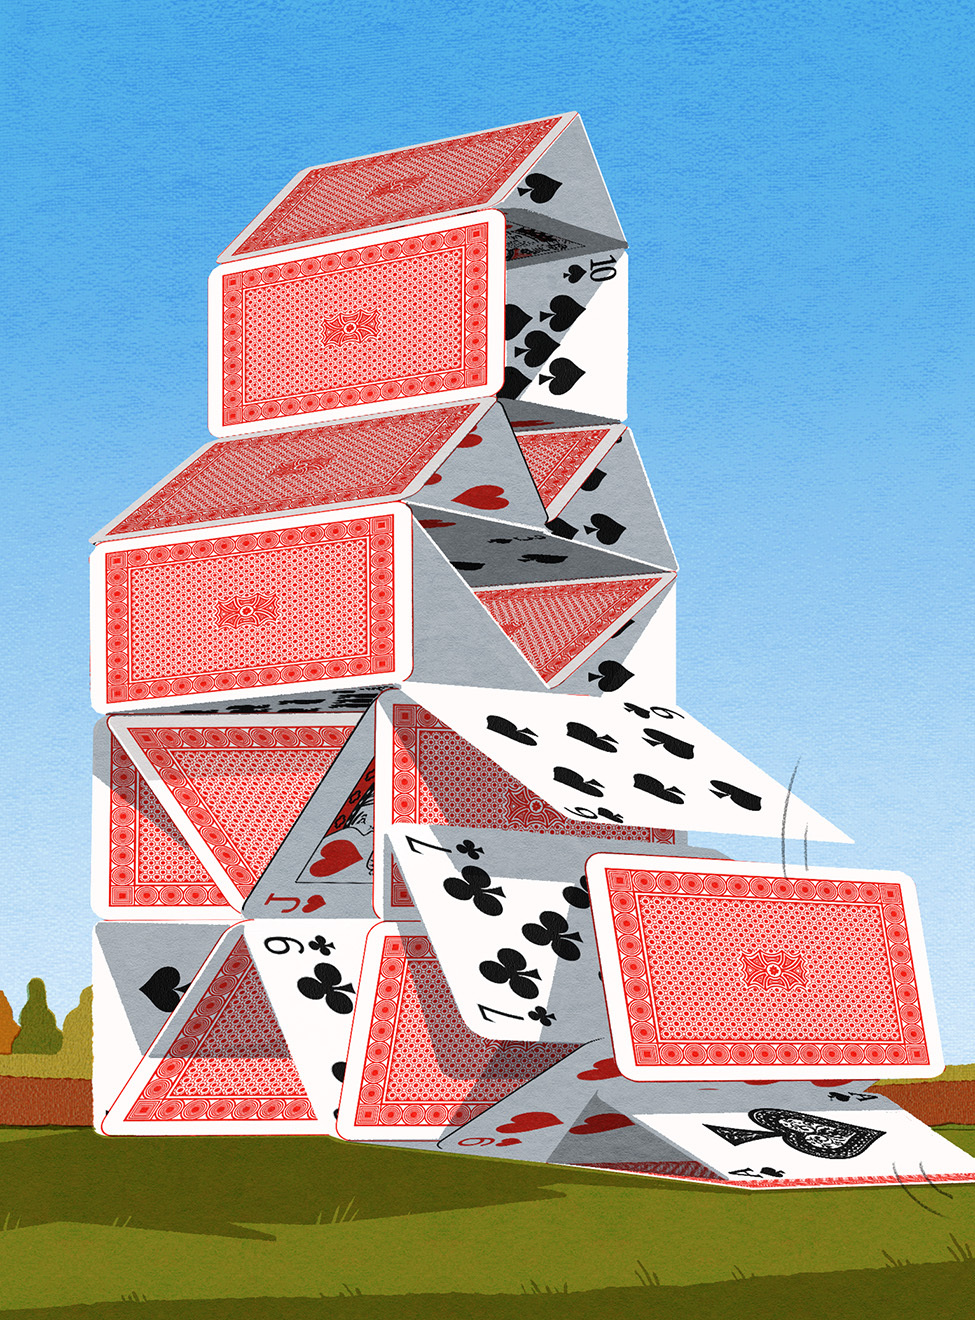 A house of cards falling apart.